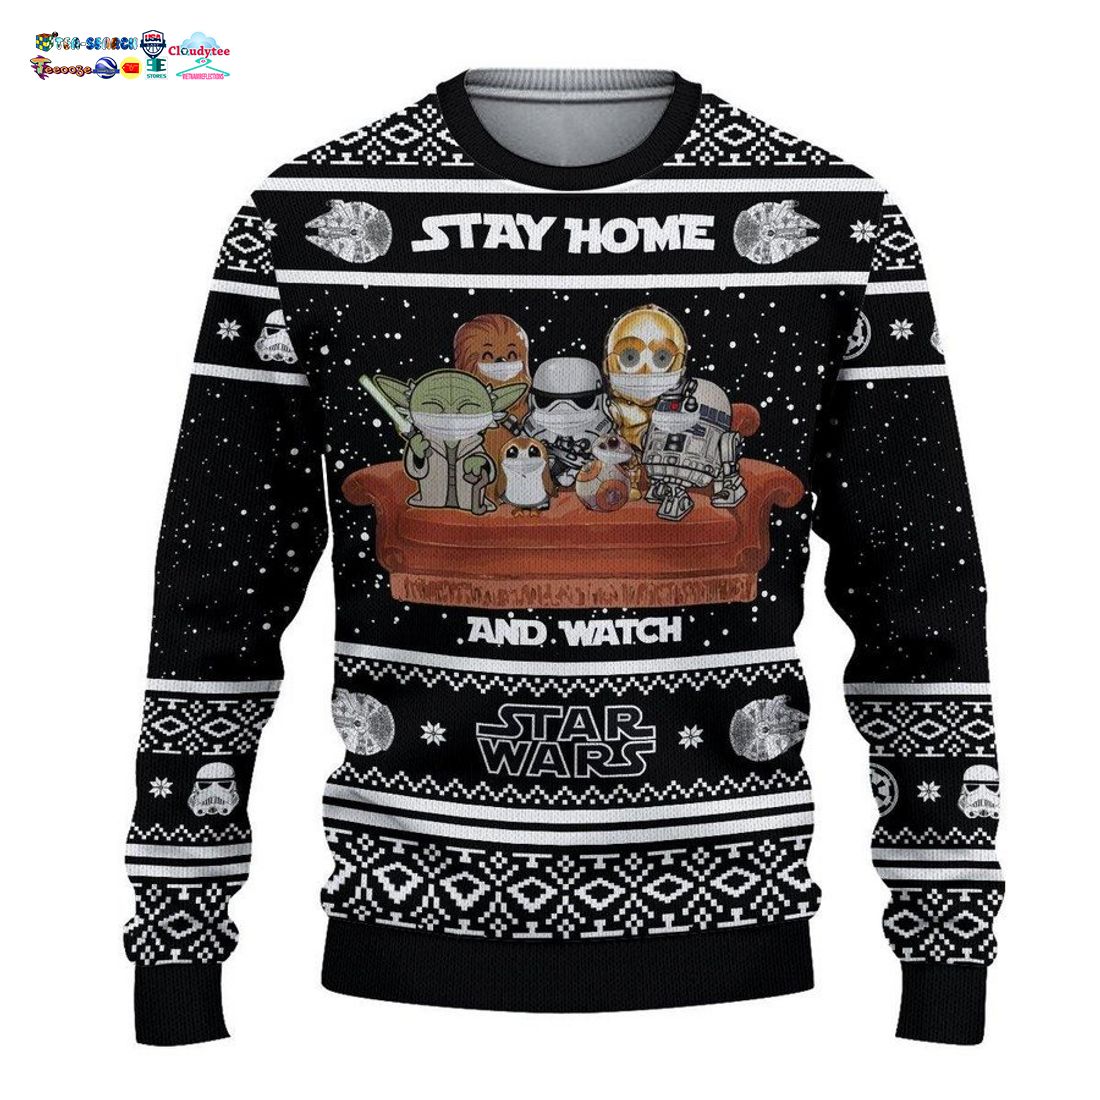 Stay Home And Watch Star Wars Ver 1 Ugly Christmas Sweater - Nice shot bro